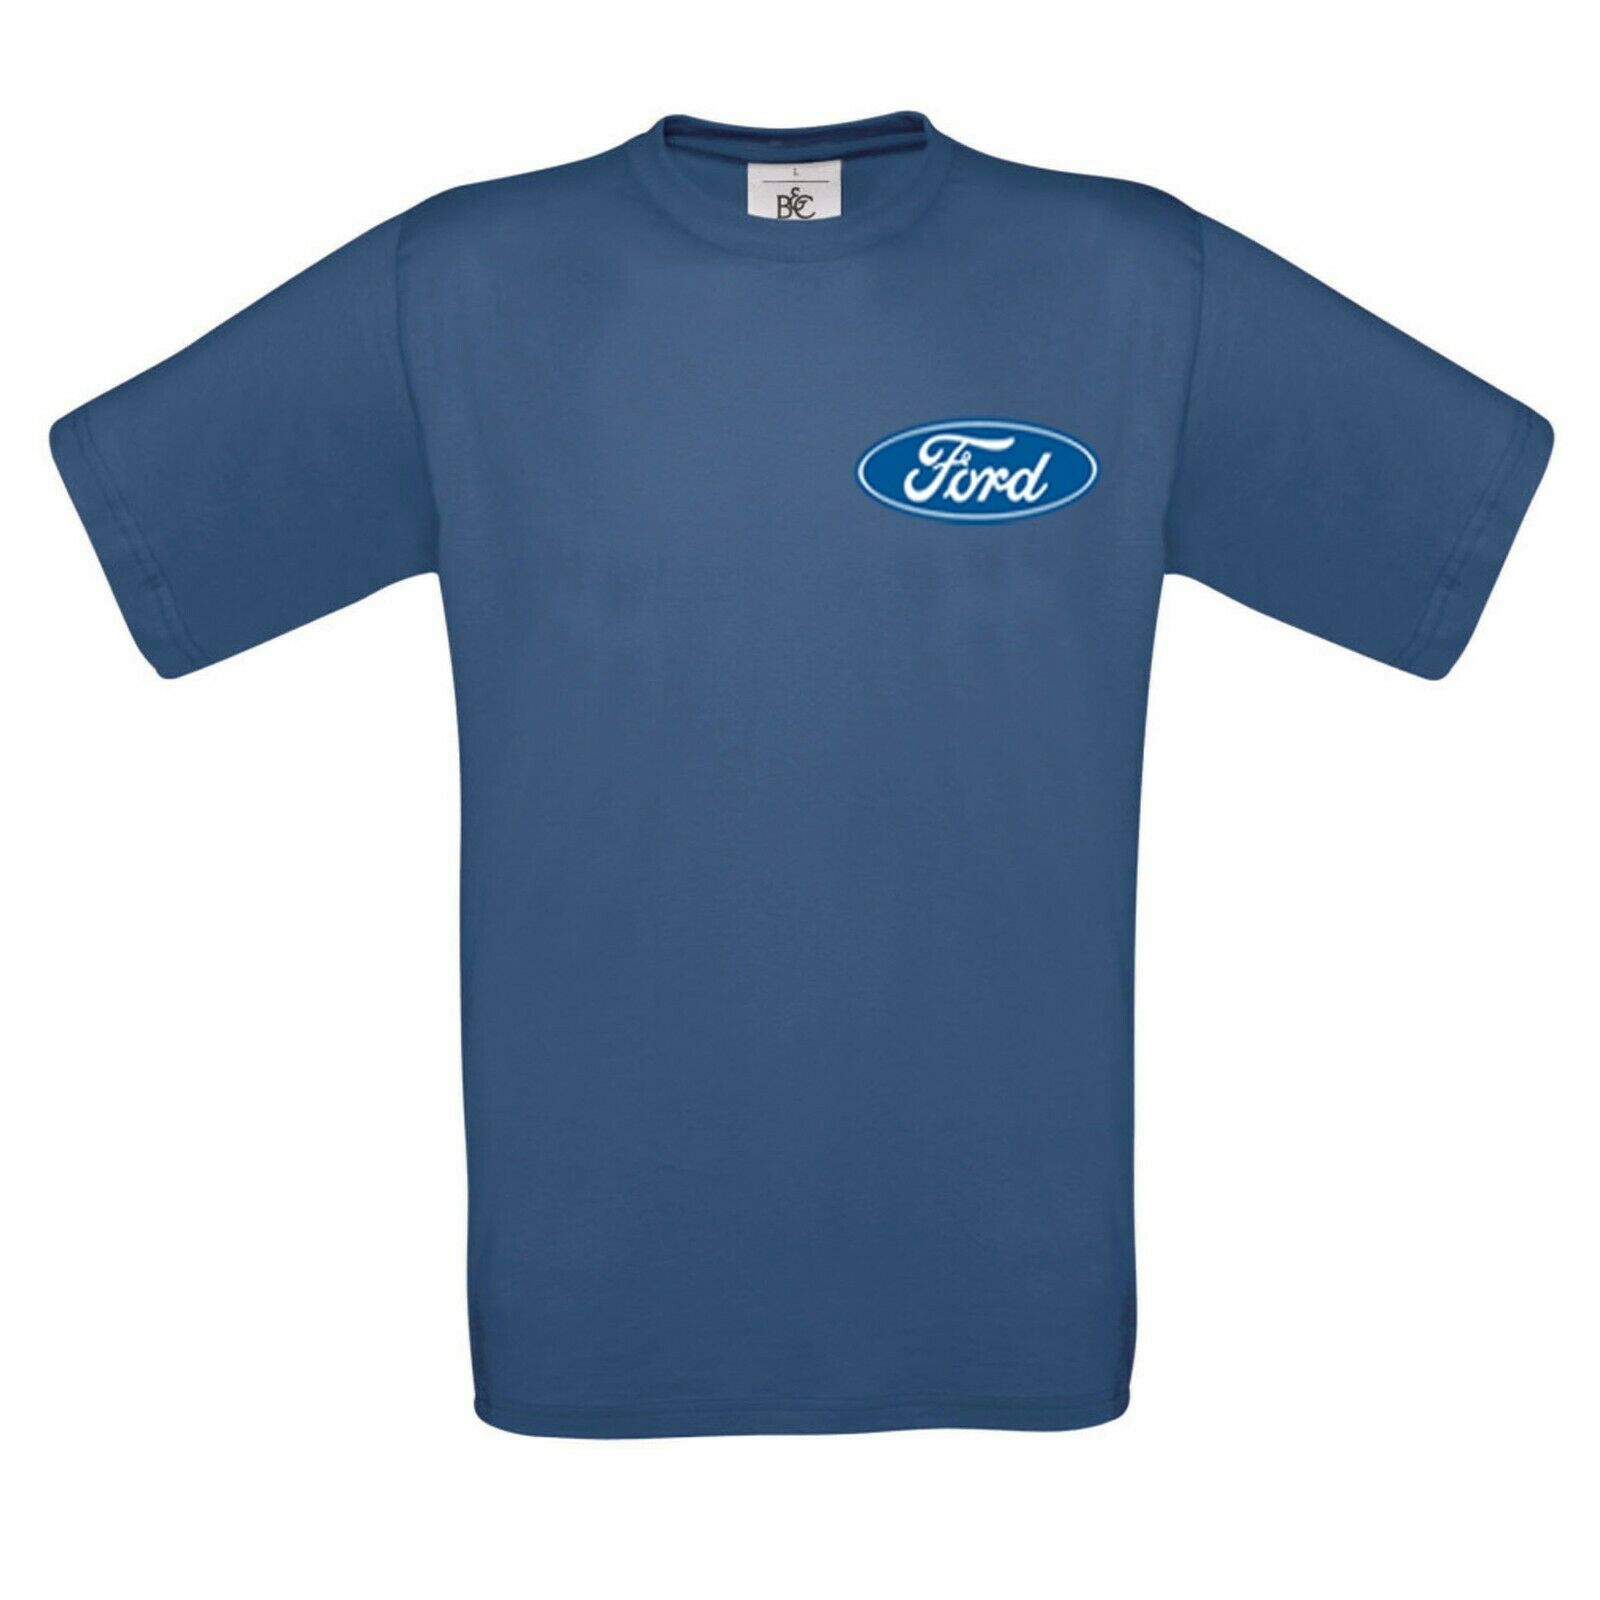 Mens Ford T Shirt Genuine Ford Performance Logo Motorsport Classic RS ST Car